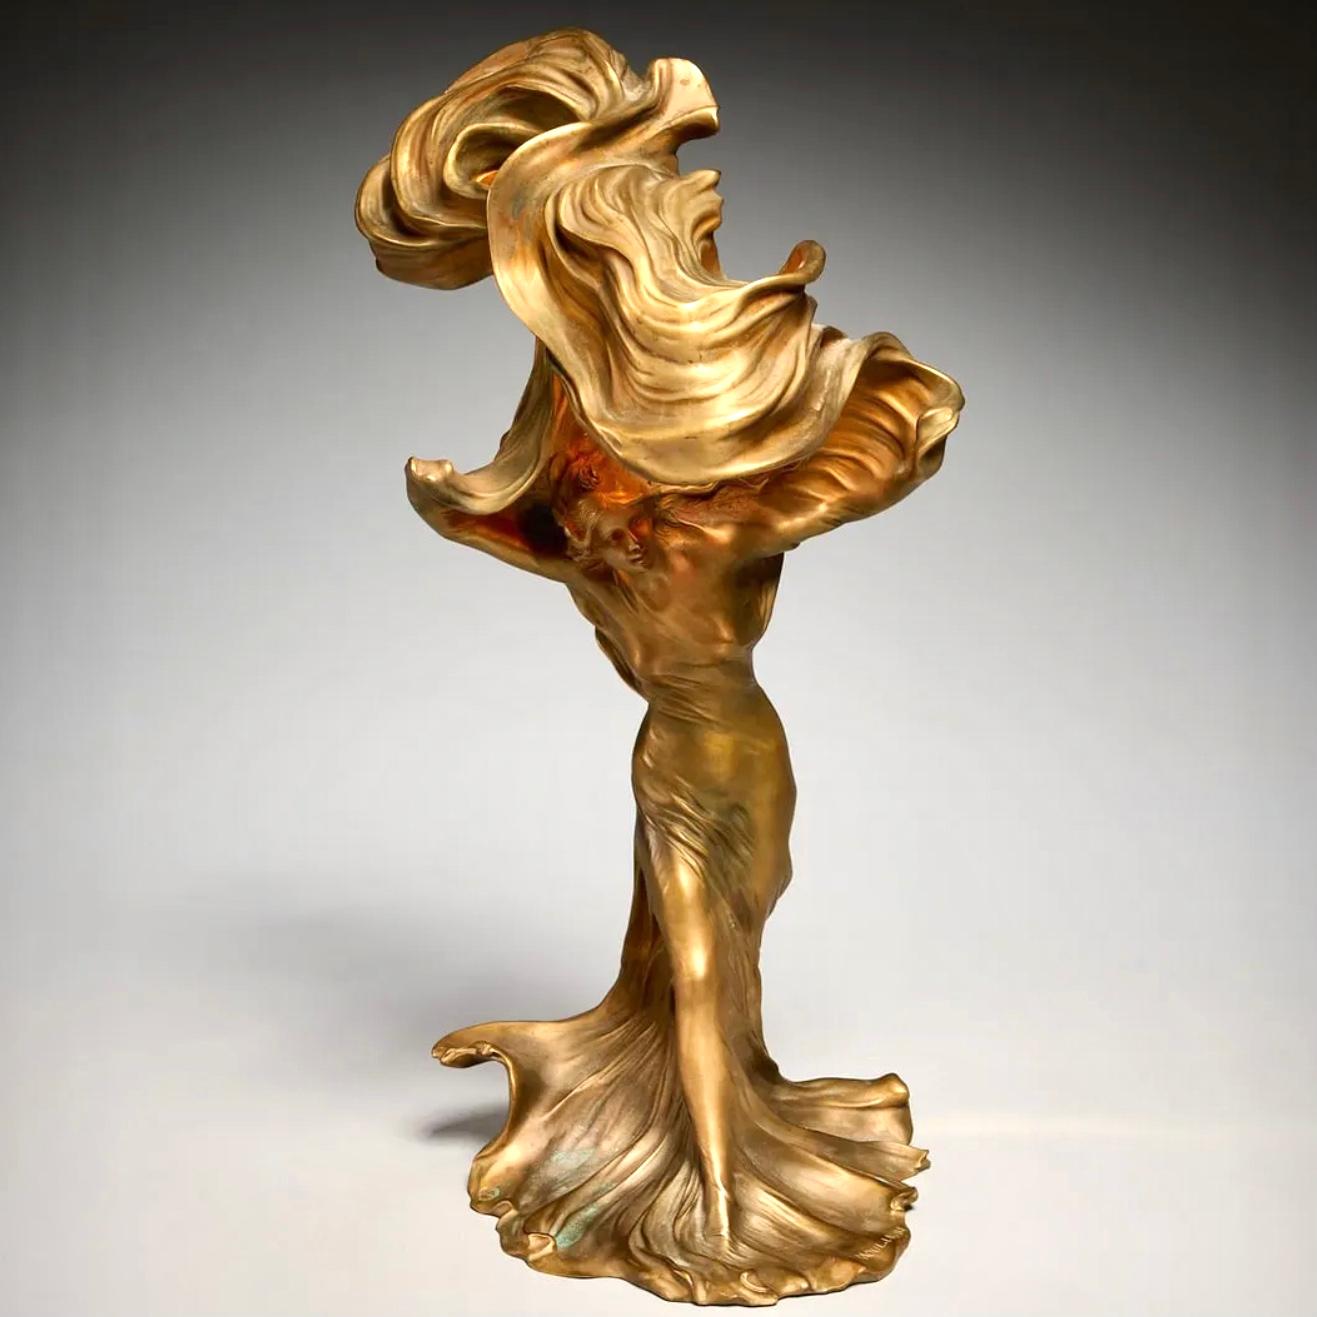 Francois-Raoul Larche 'Loie Fuller' Gilt Bronze Figural Table Lamp

The pinnacle of bronze Art Nouveau lamps for your consideration. This particular Raoul Larch lamp has a beautiful bronze gilt color which is not a bright gold. The chasing is